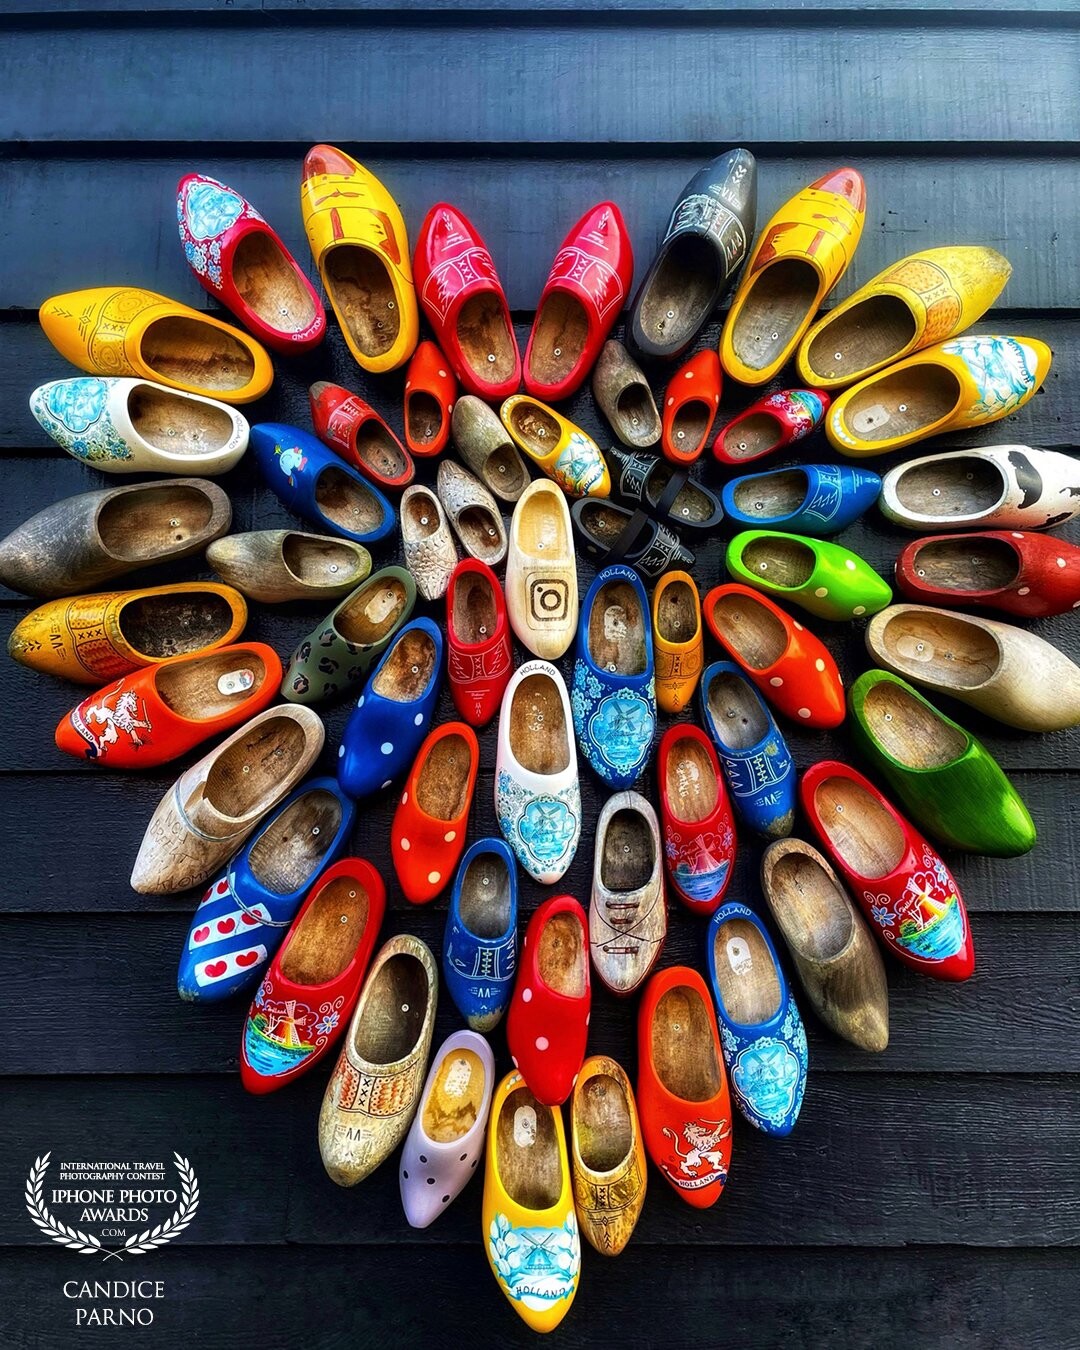 In the town of Zaans Schans, about 30 minutes from Amsterdam there is an authentic wooden shoe factory that has been preserving the art of wooden shoe making for 40 years.  This beautiful display of their work is shown on the outside of their workshop for all to admire.